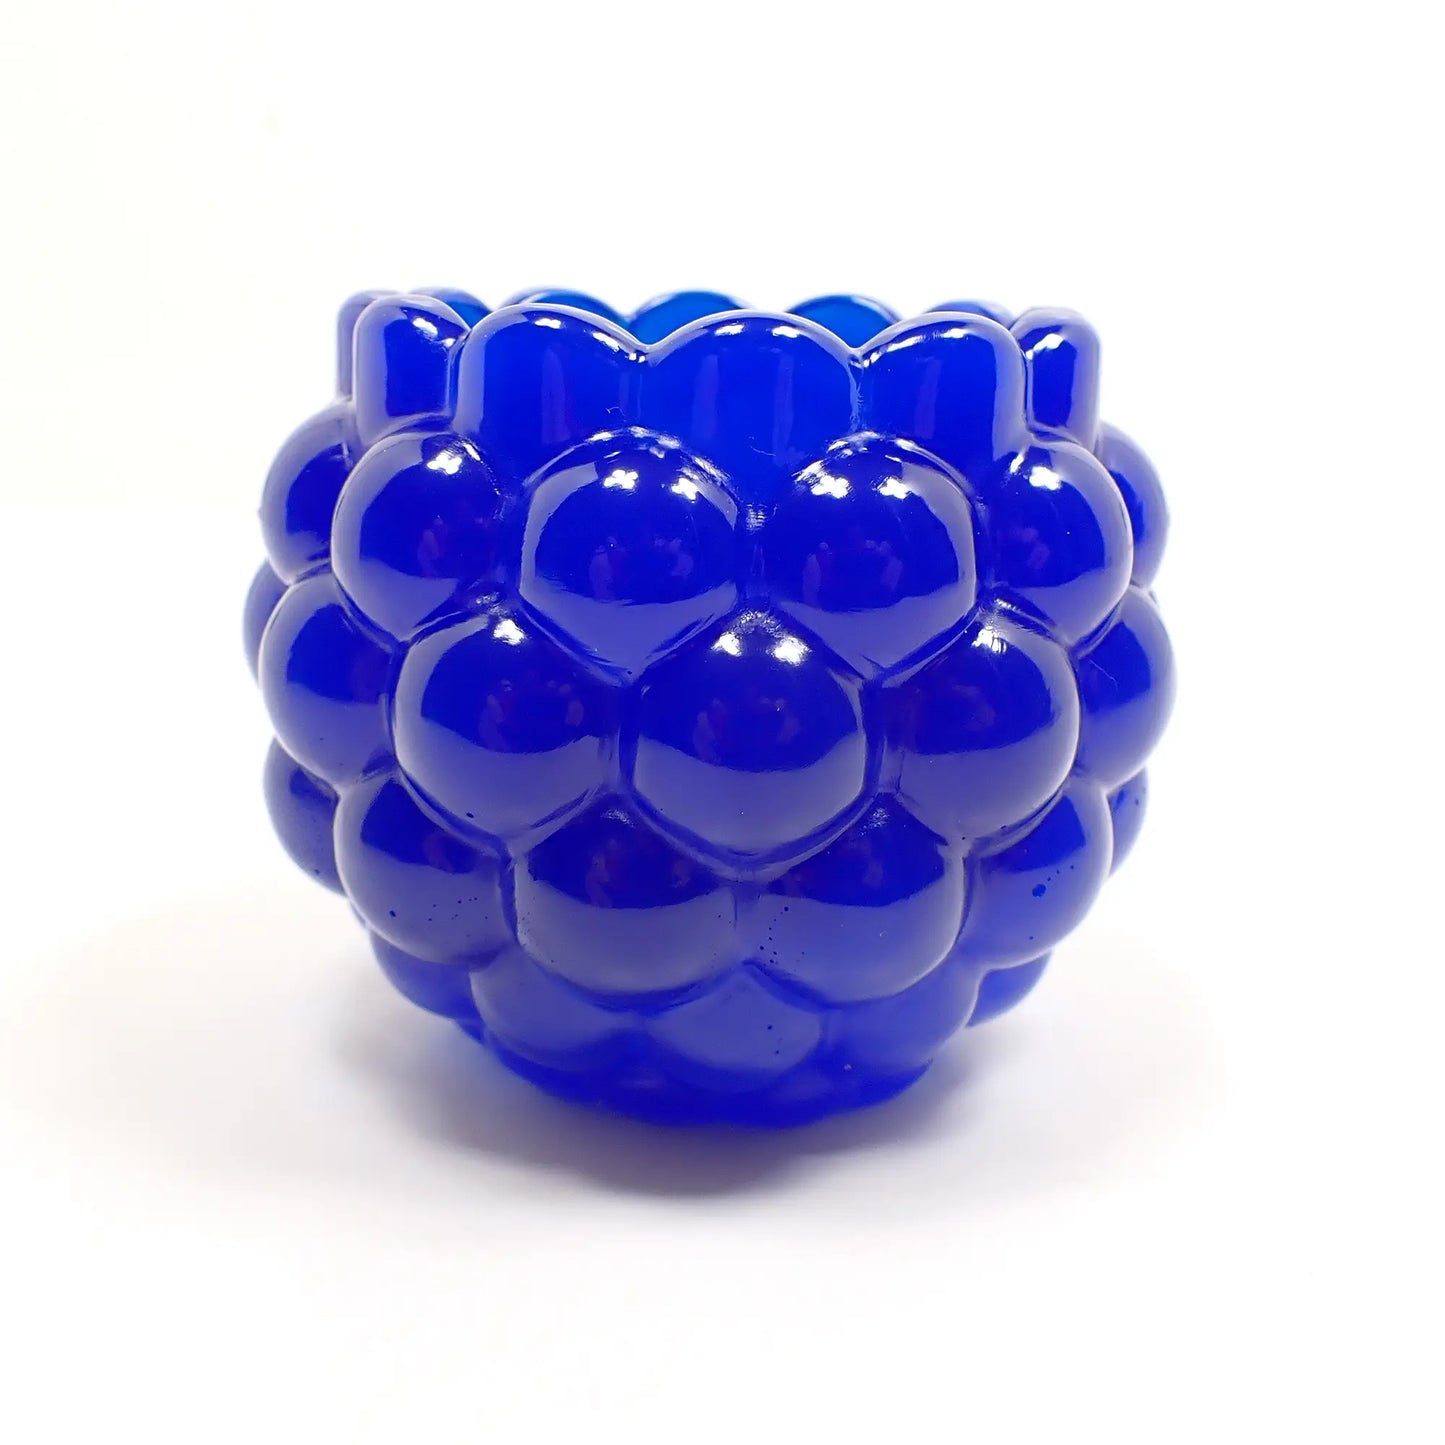 Small Handmade Round Royal Blue Resin Pot with Scalloped Edge